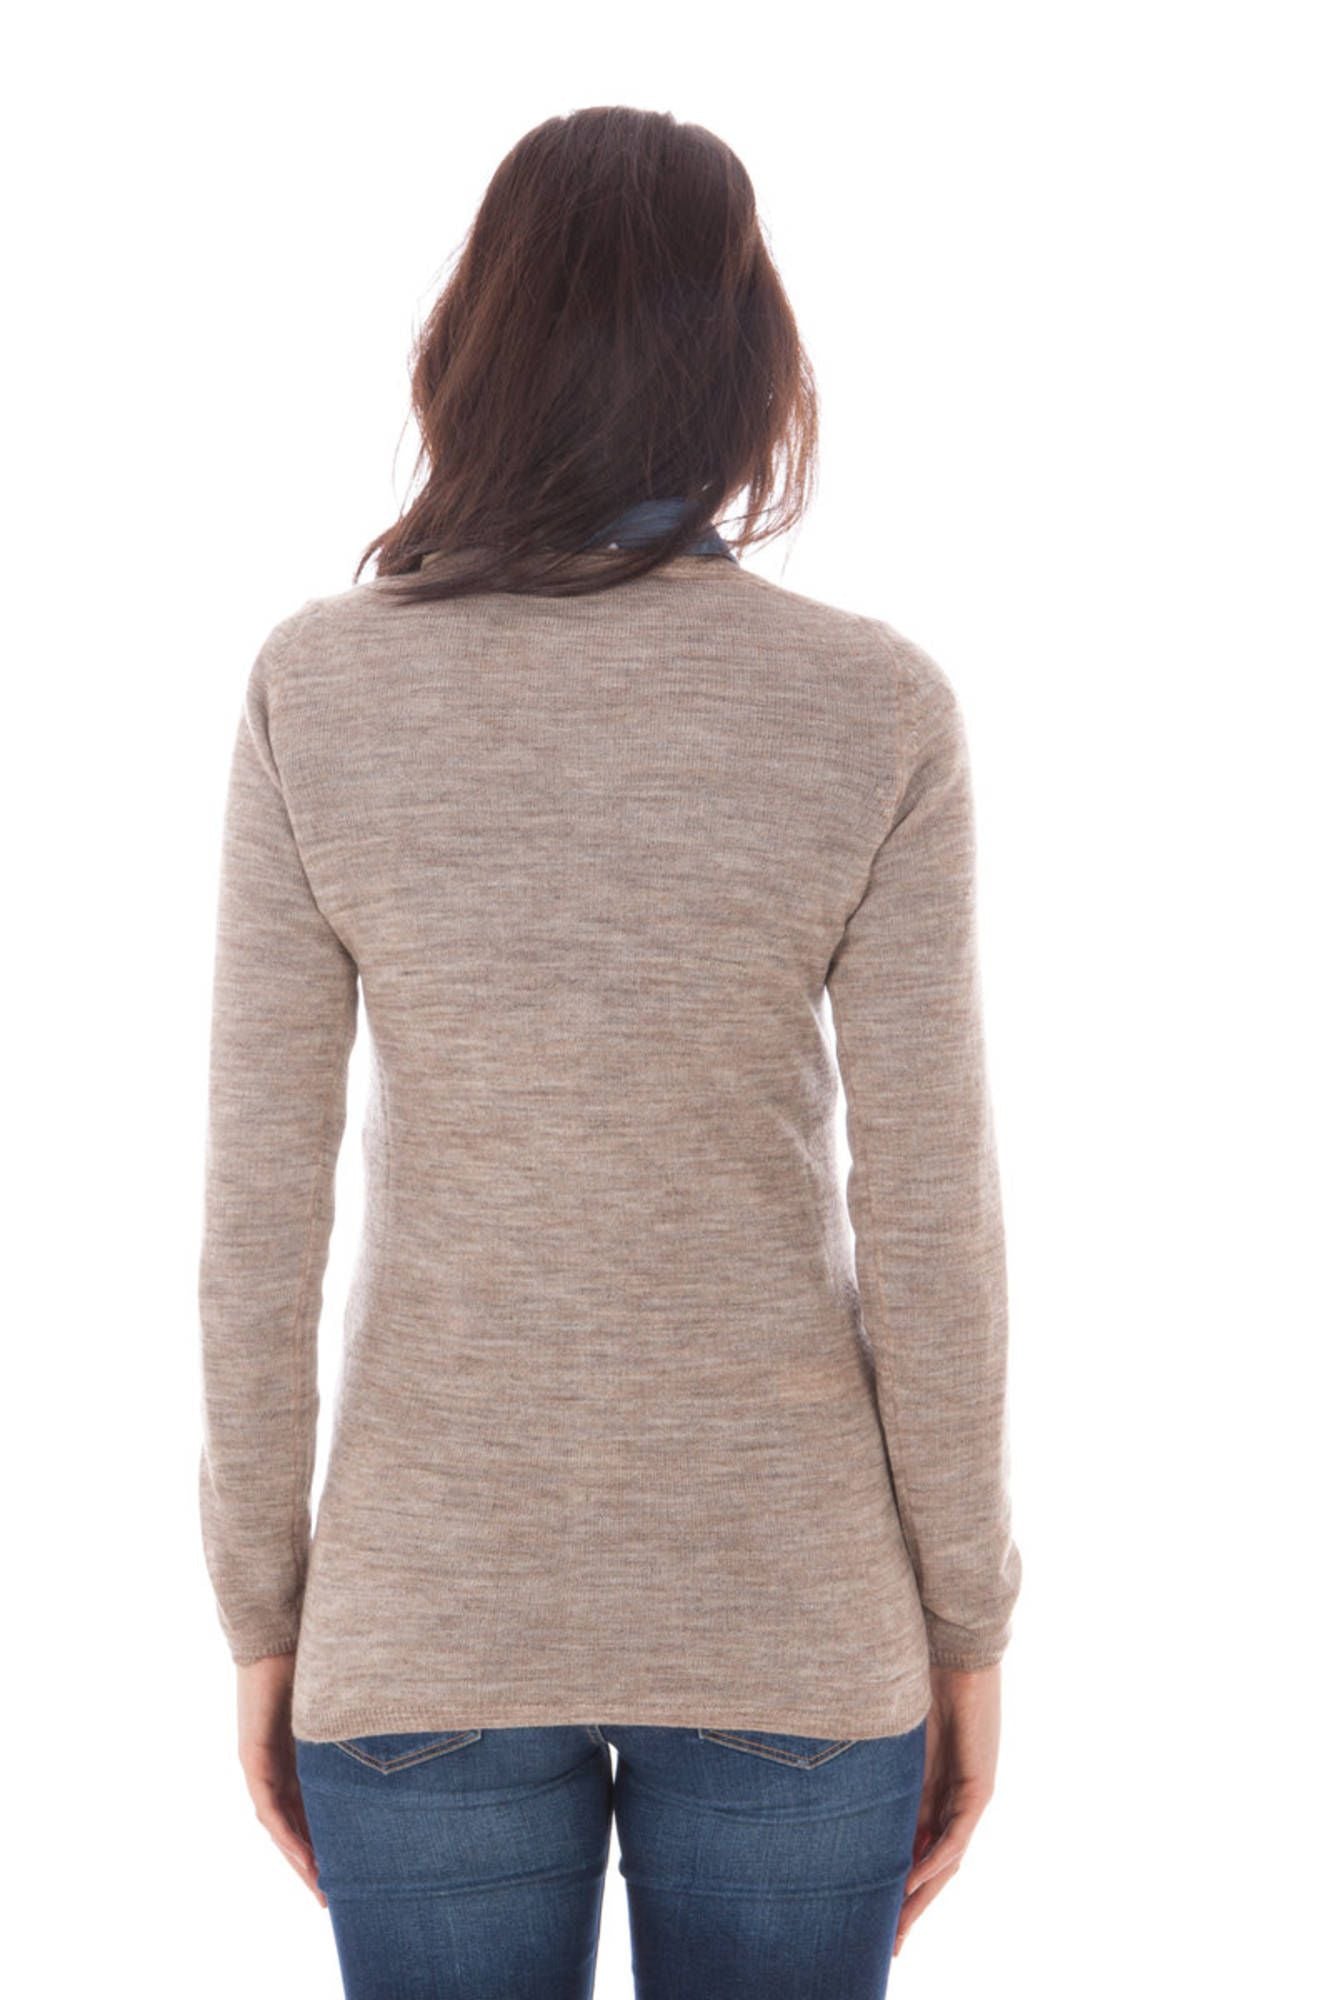 FRED PERRY CARDIGAN WOMAN BEIGE-Maglie-FRED PERRY-BEIGE-M-Urbanheer